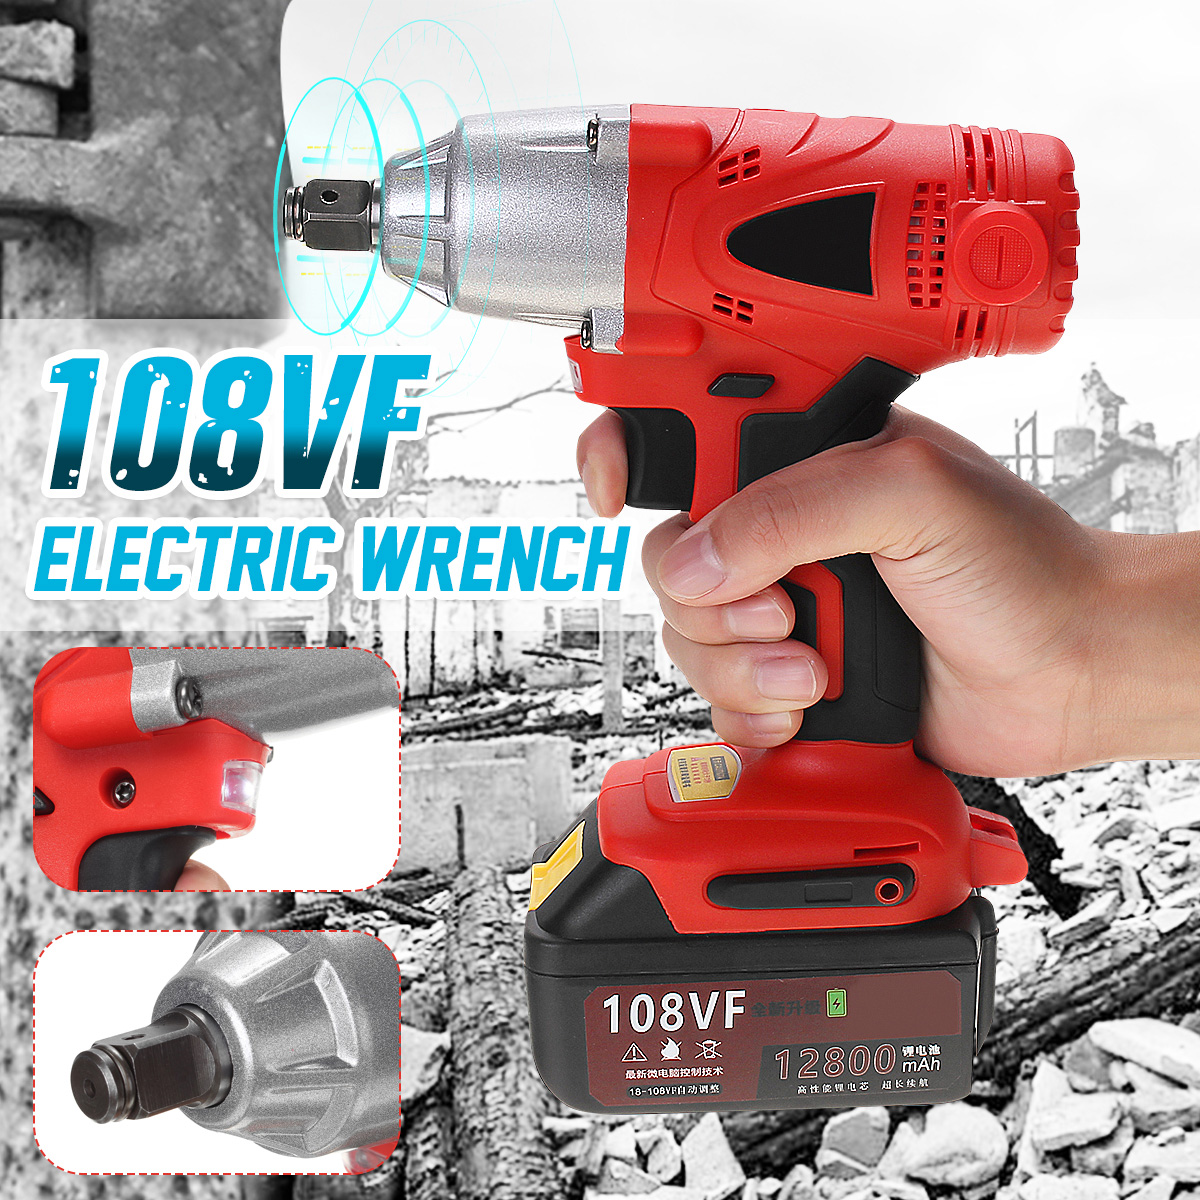 108VF-12800mAh-330Nm-Brushless-Cordless-Electric-Wrench-Impact-Driver-Power-Tool-Rechargeable-Lithiu-1577976-1